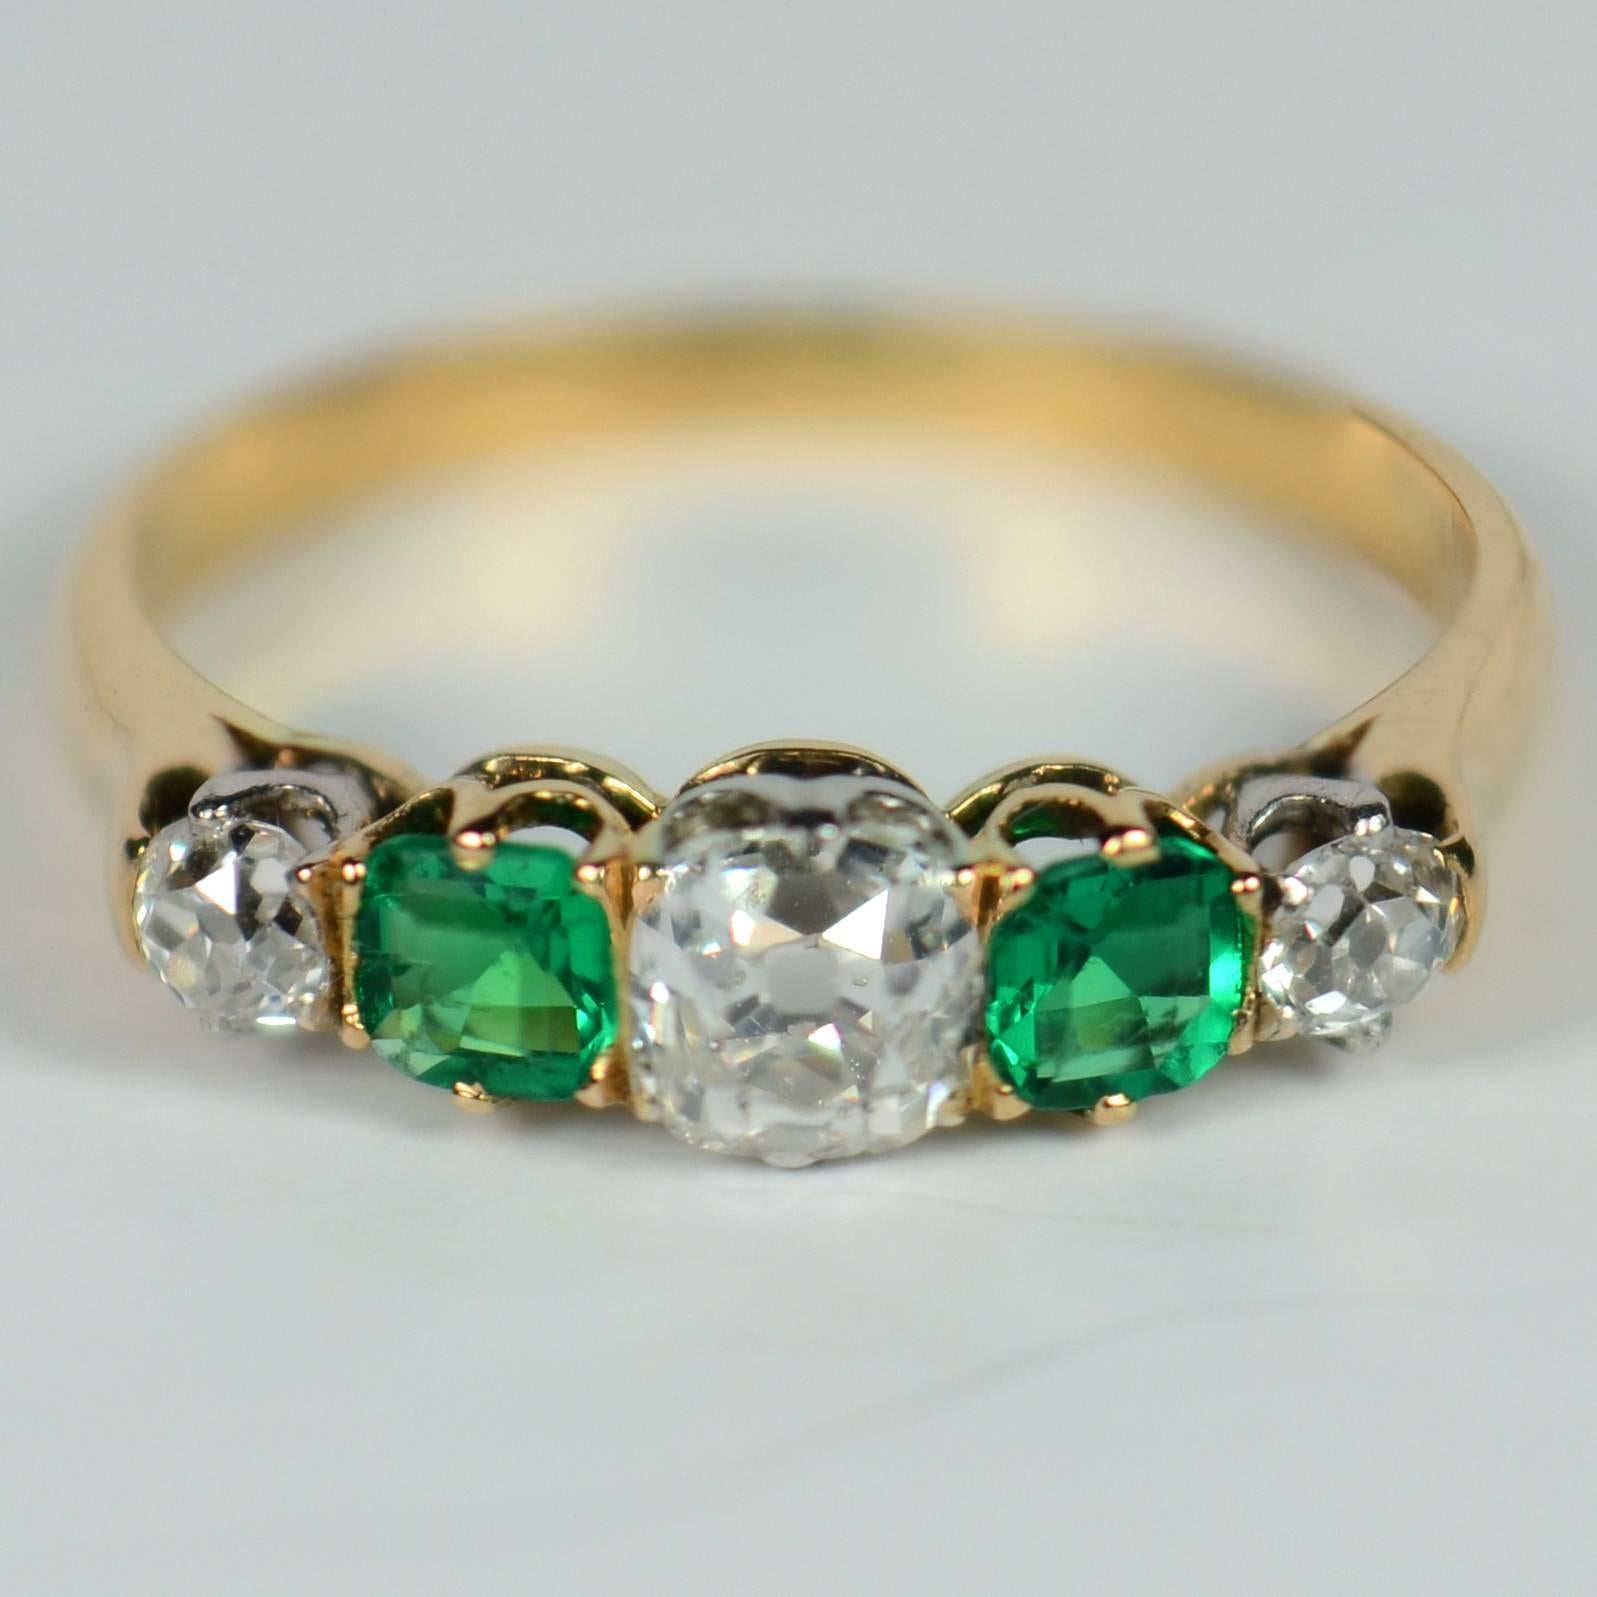 A classic five-stone ring set with two intensely green step-cut emeralds and three bright and lively old-cut diamonds.
The diamonds weigh a total of approximately 0.70 carats and are F-G colour and VS-SI clarity.  The emeralds weigh a total of